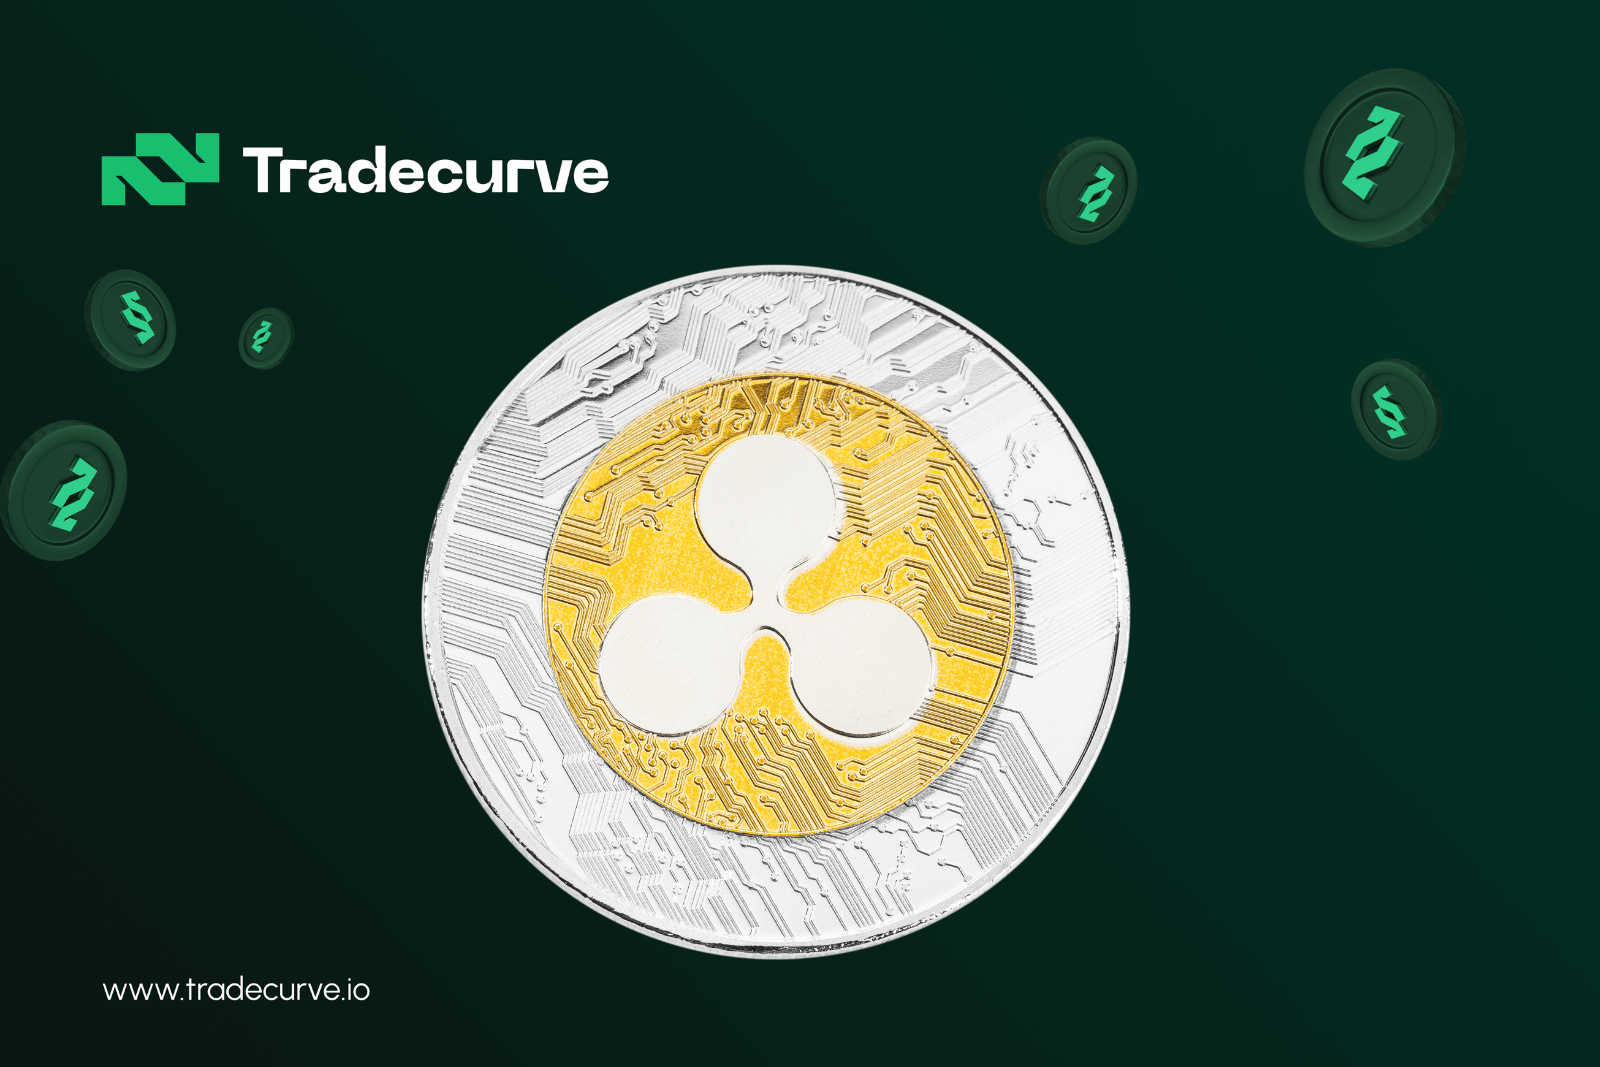 Solana and Ripple (XRP) Surge Over 50% While Tradecurve Eyes 50x Presale Pump